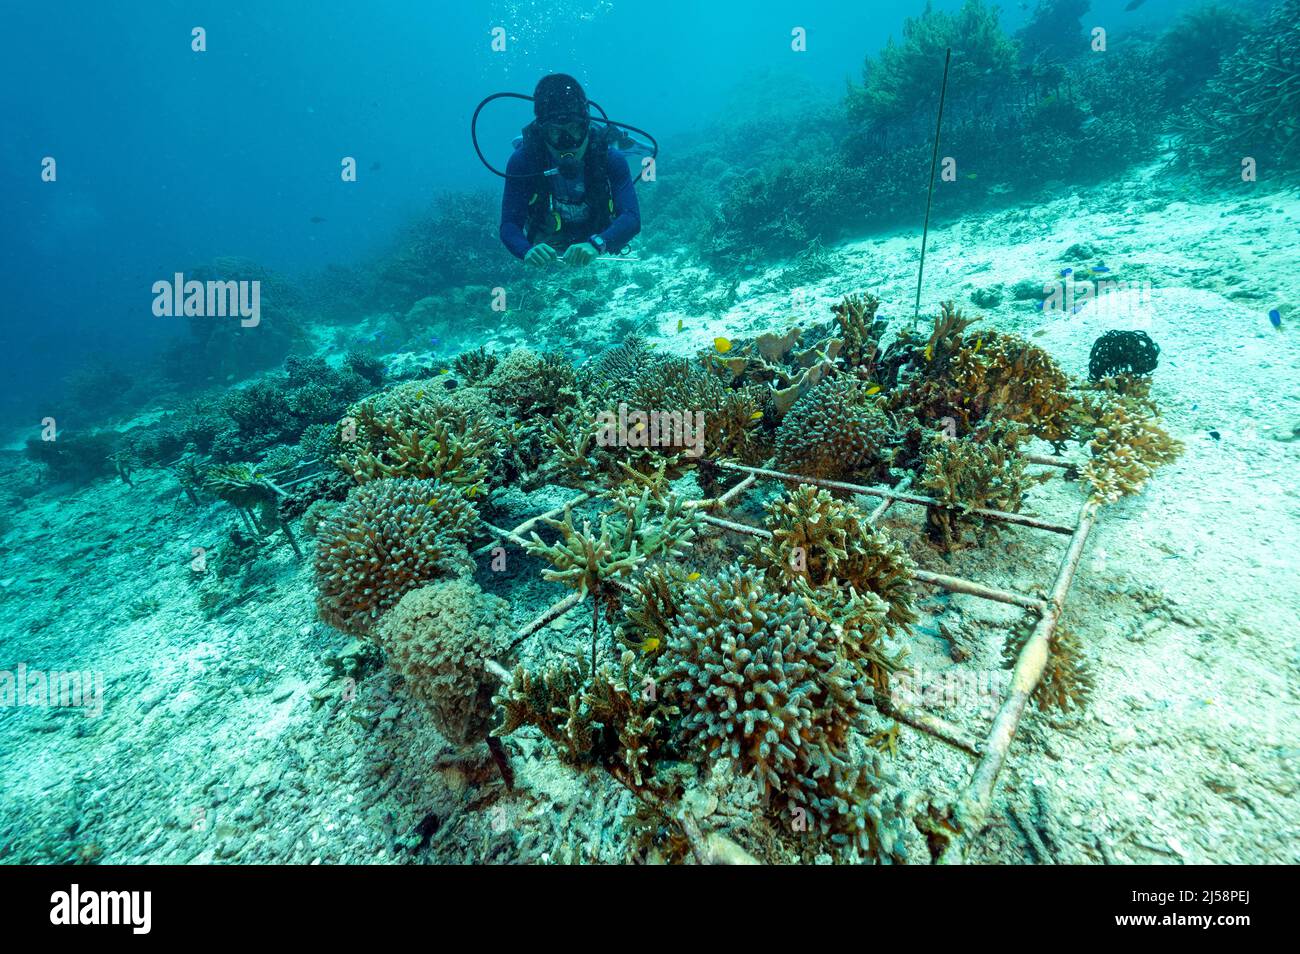 Coral gardening project Raja Ampat Indonesia. Stock Photo